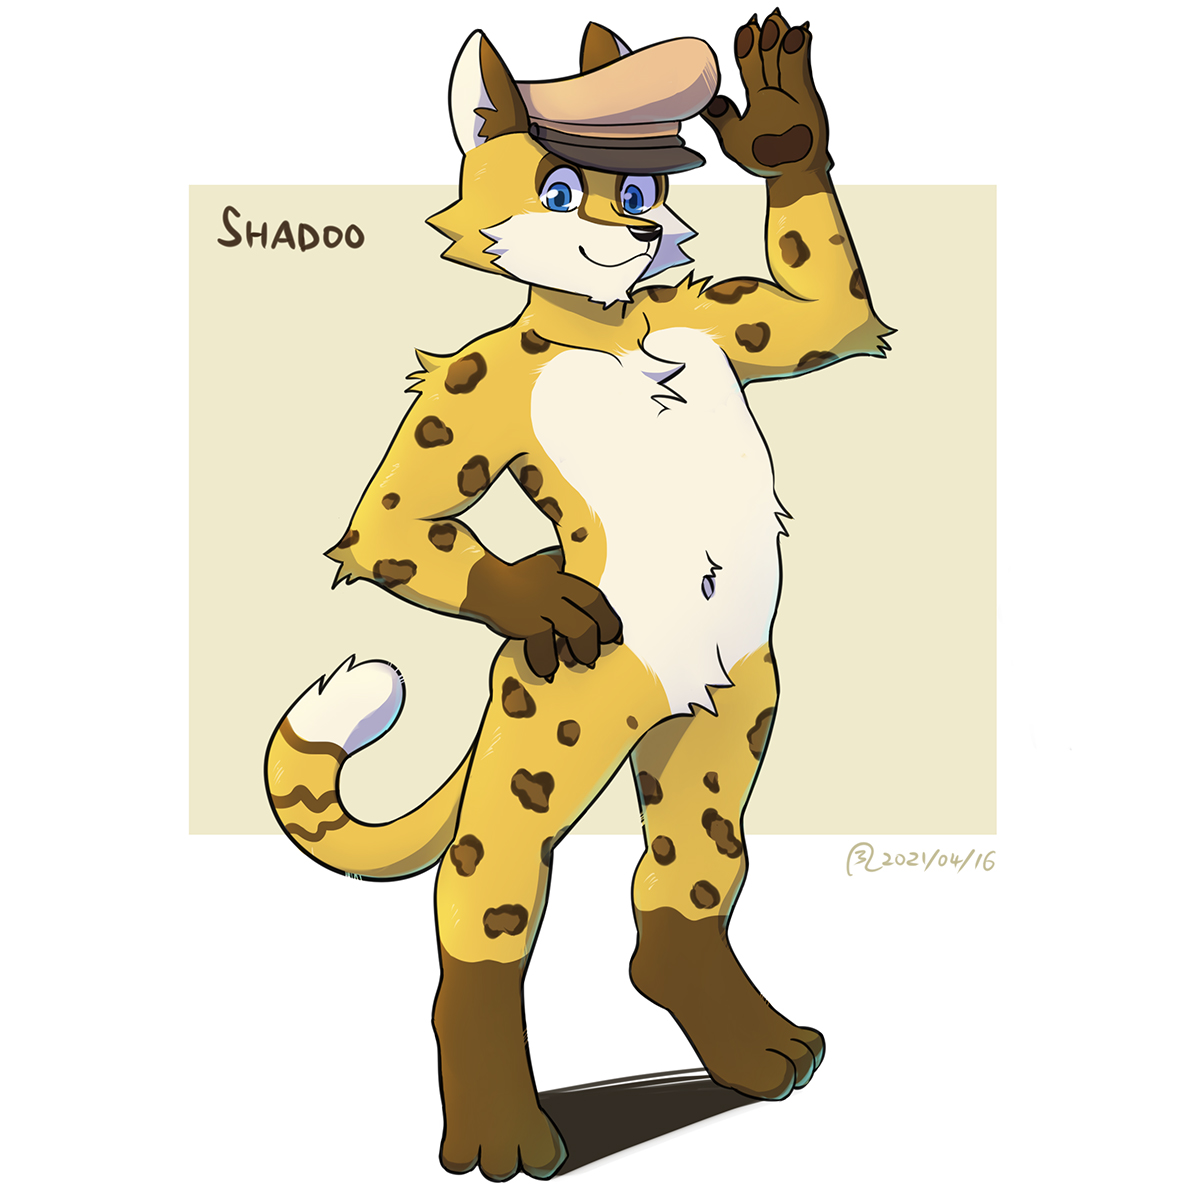 Shadoo, an anthropomorphic character based on leopard cat, created by @ShadooLang on Twitter.